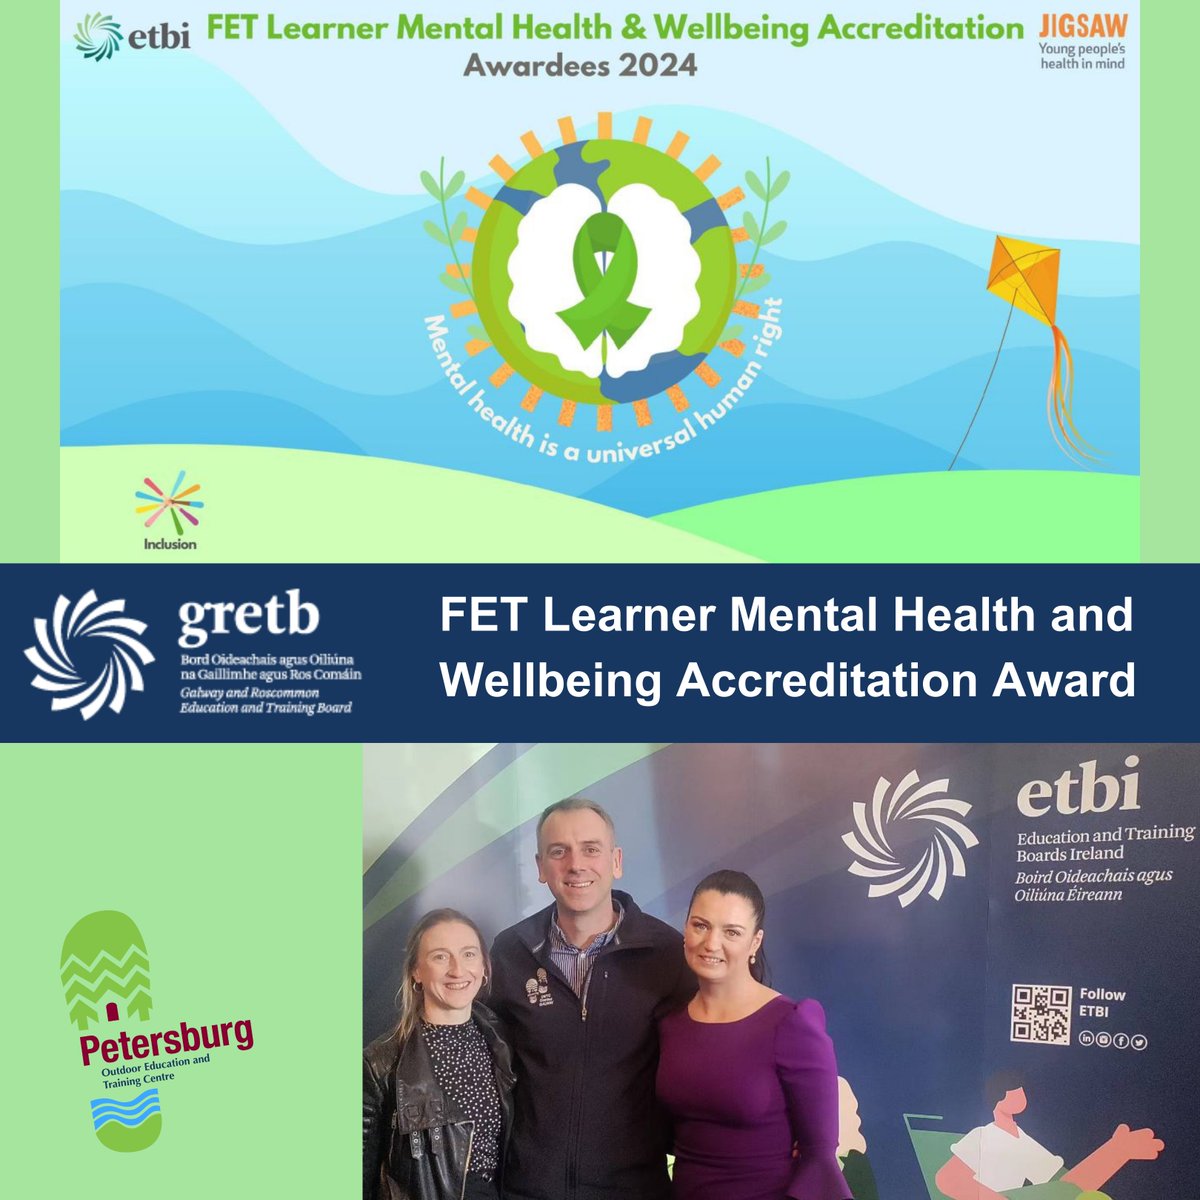 We are delighted to announce that @PetersburgOETC have obtained accreditation for their Women's Wellbeing in the Workplace programme. It has been awarded Level 1 accreditation for learner mental health and wellbeing. Congratulations to all involved! @ETBIreland @JigsawYMH